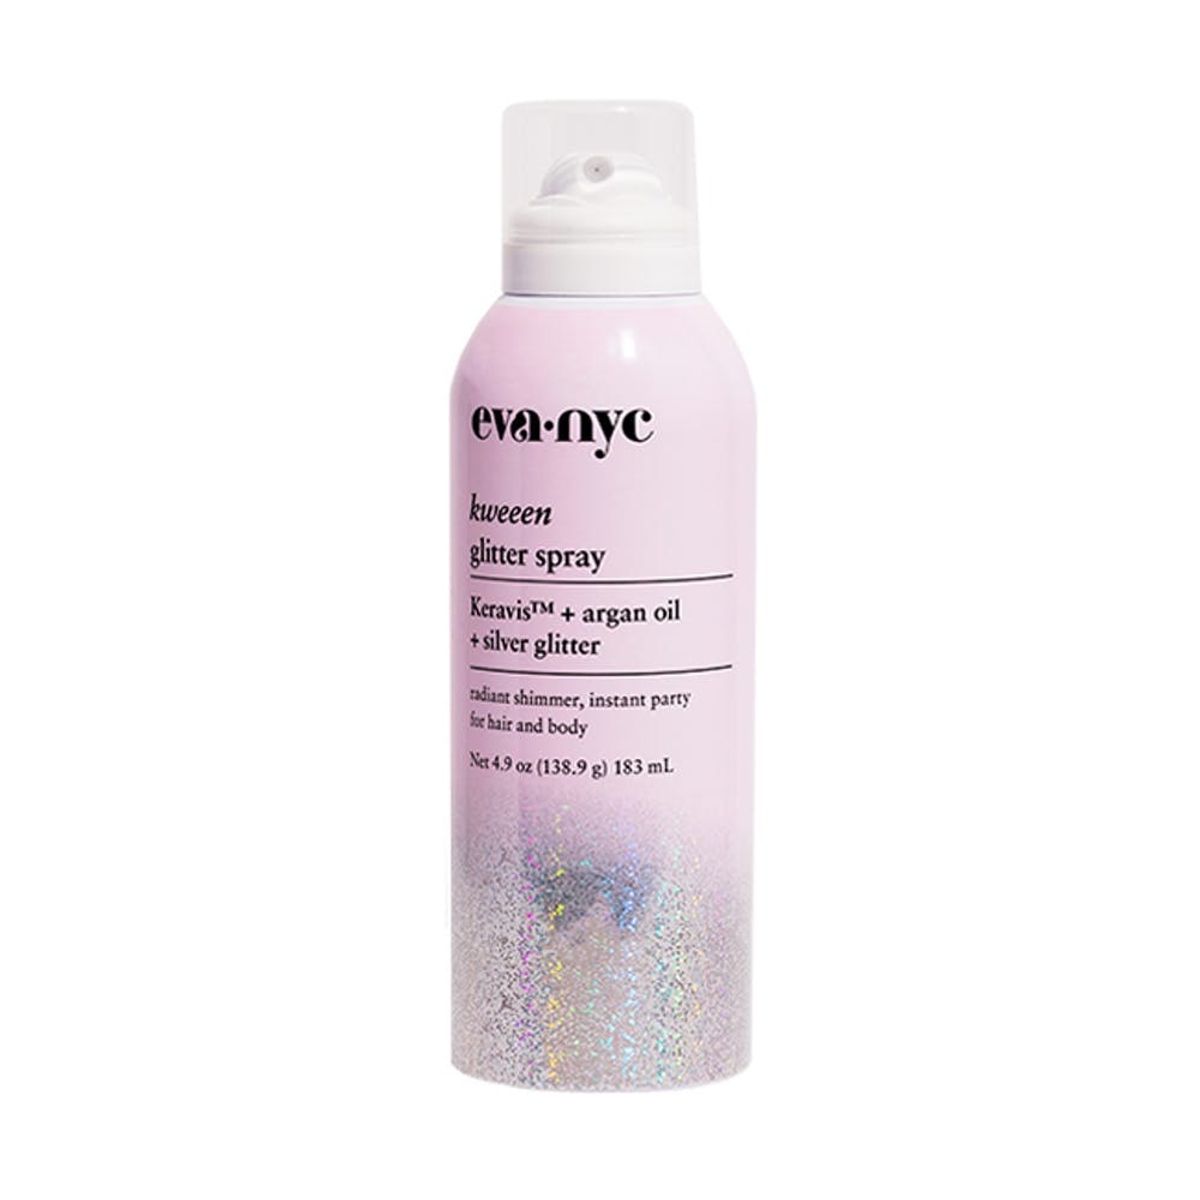 Every Glitter Hair Spray You Need, Ranked from Subtle Shimmer to Serious Sparkle